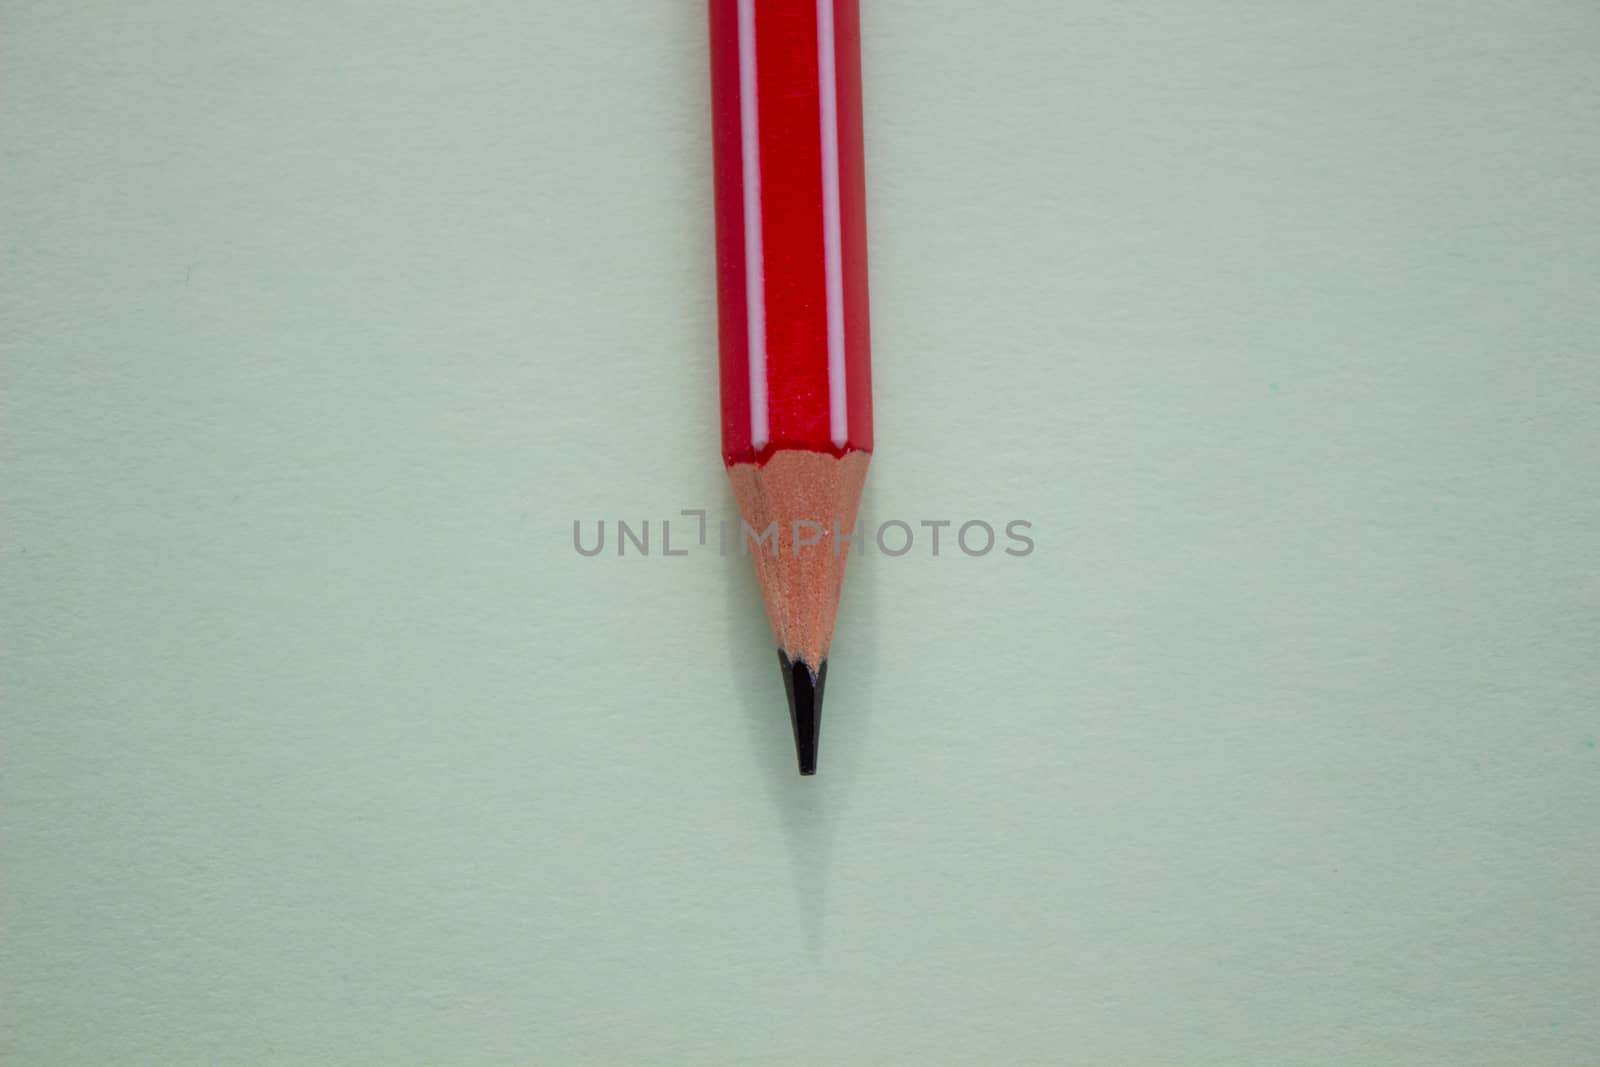 One red pencil on a light green background